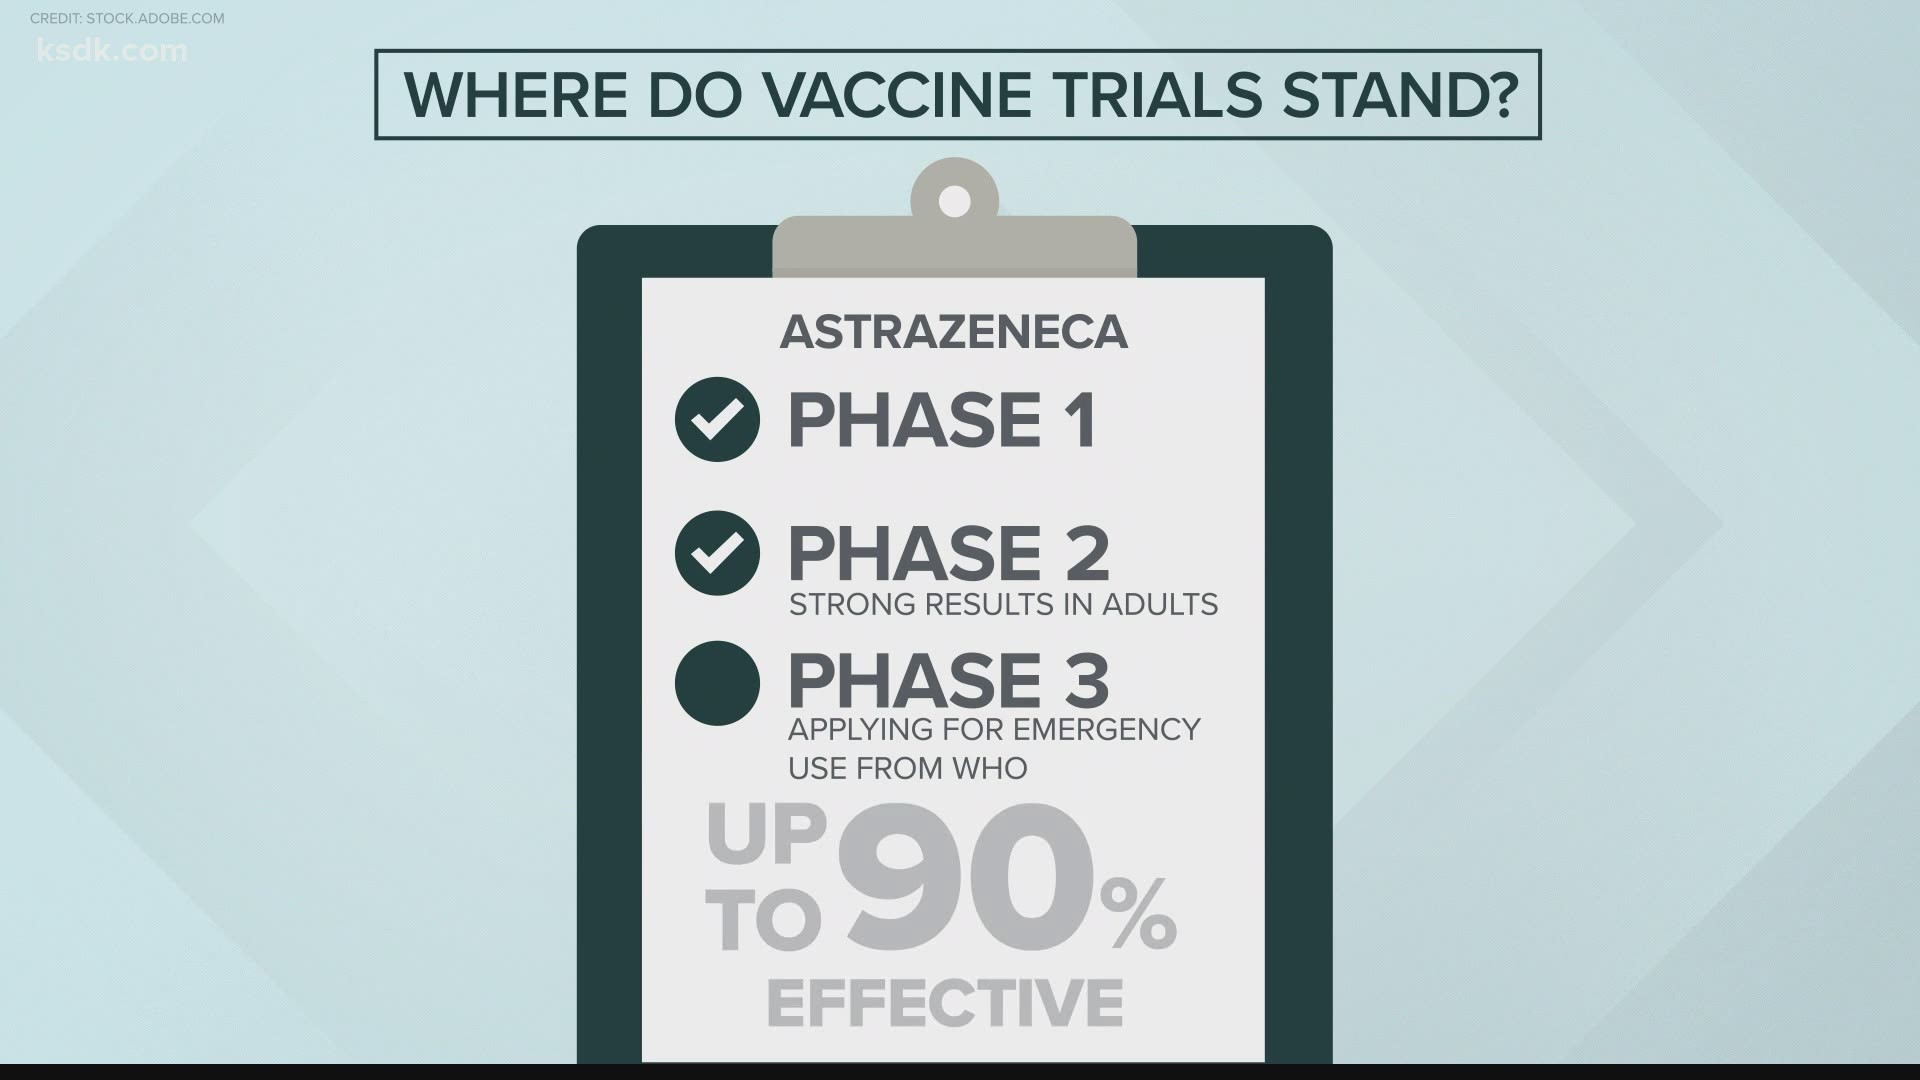 They say late-stage trials show their vaccine is between 70 to 90 percent effective.